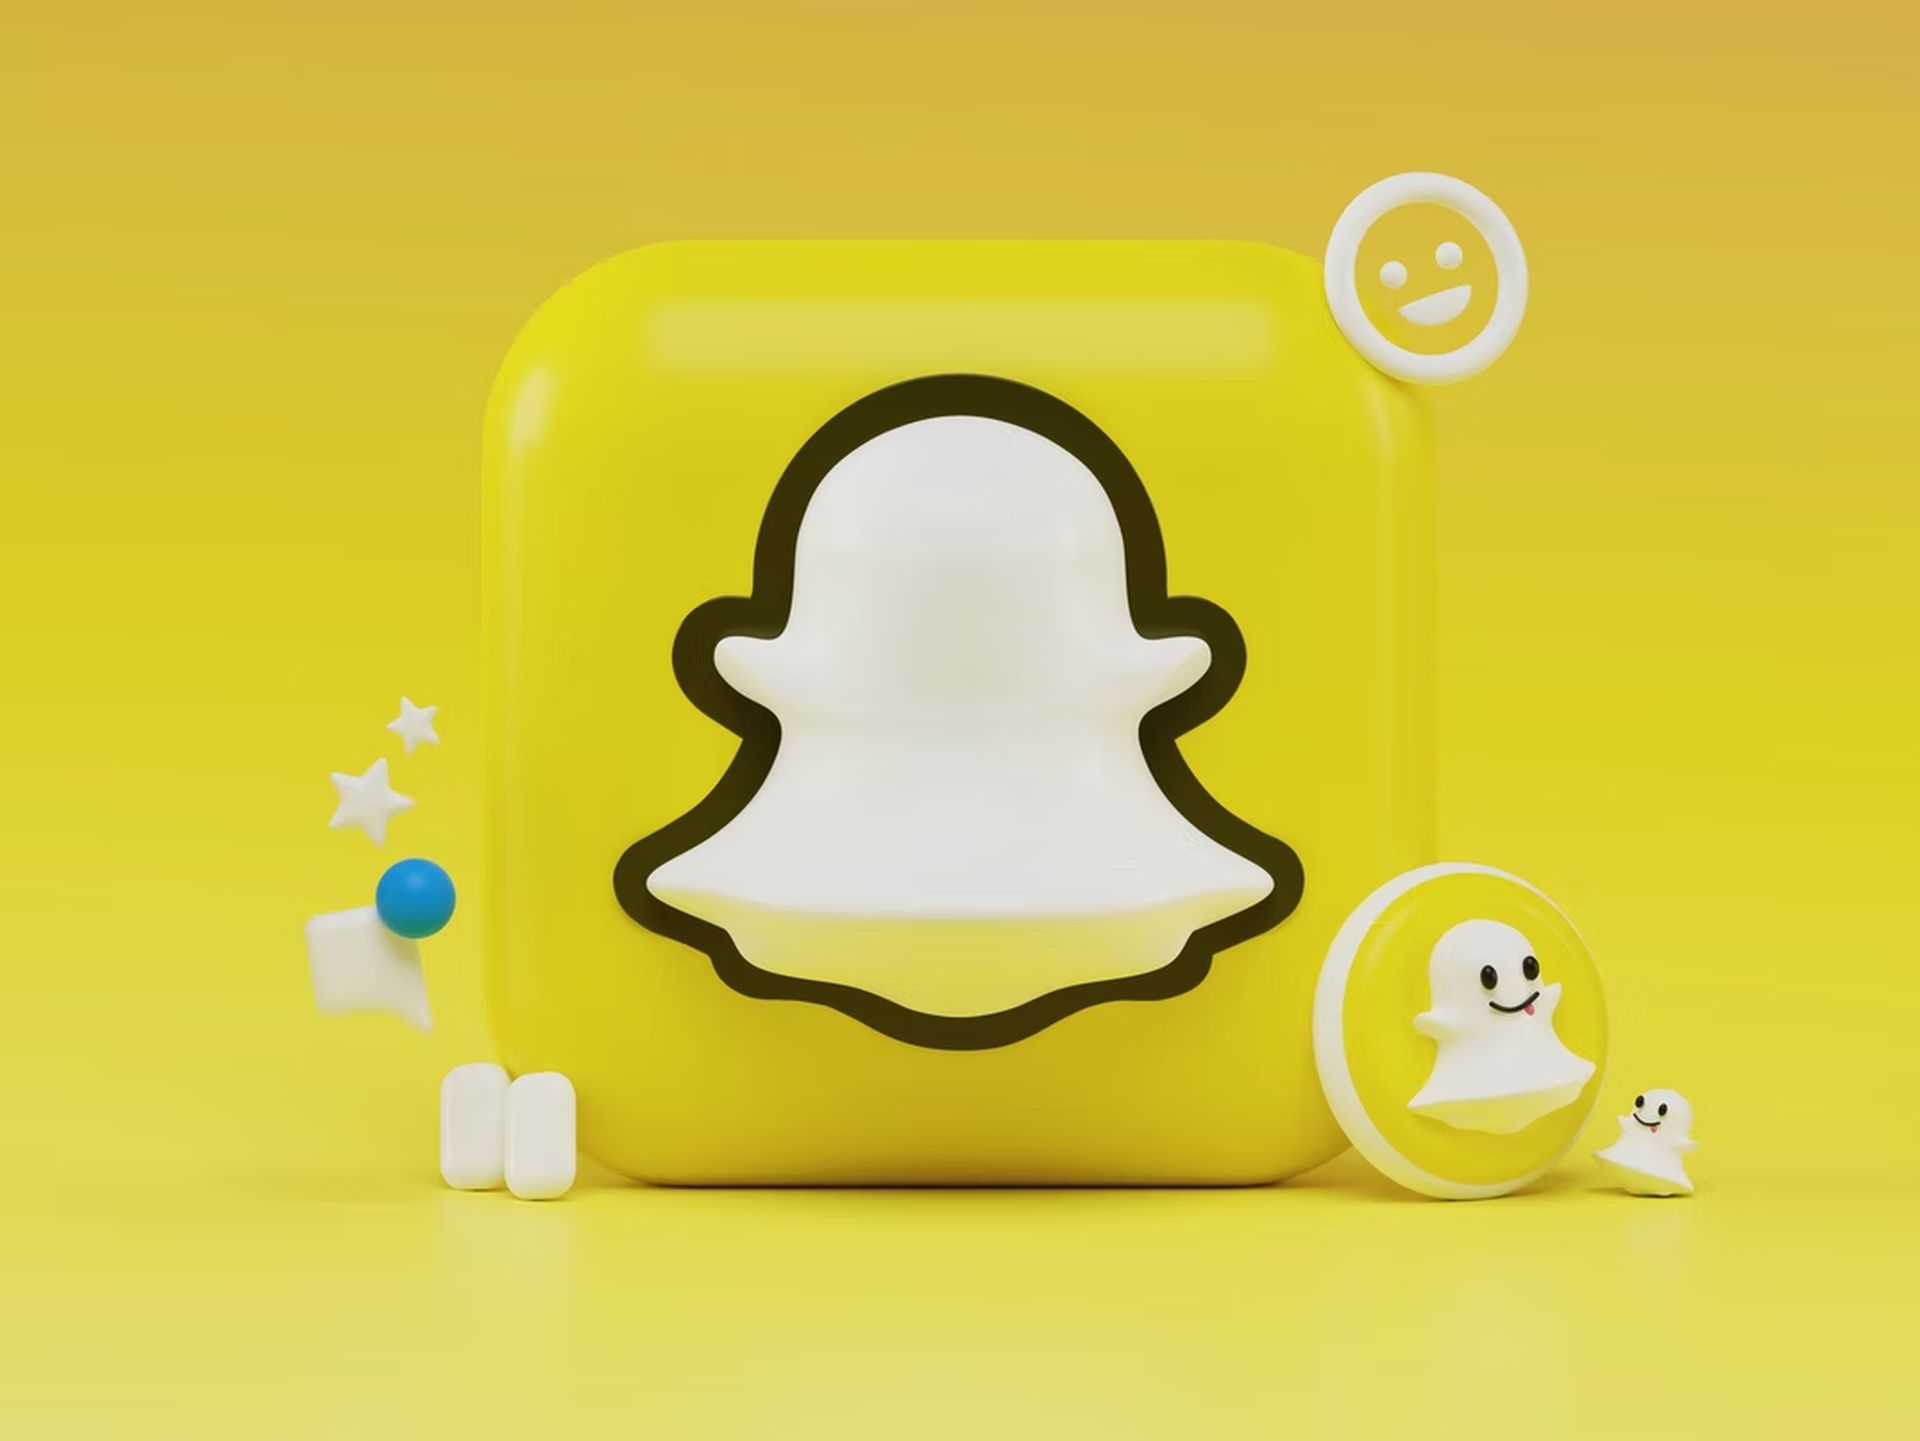 Let's explain how to get a Snapchat Plus free trial for you guys today. Users of Snapchat Plus can test out its premium features for free during the trial period.